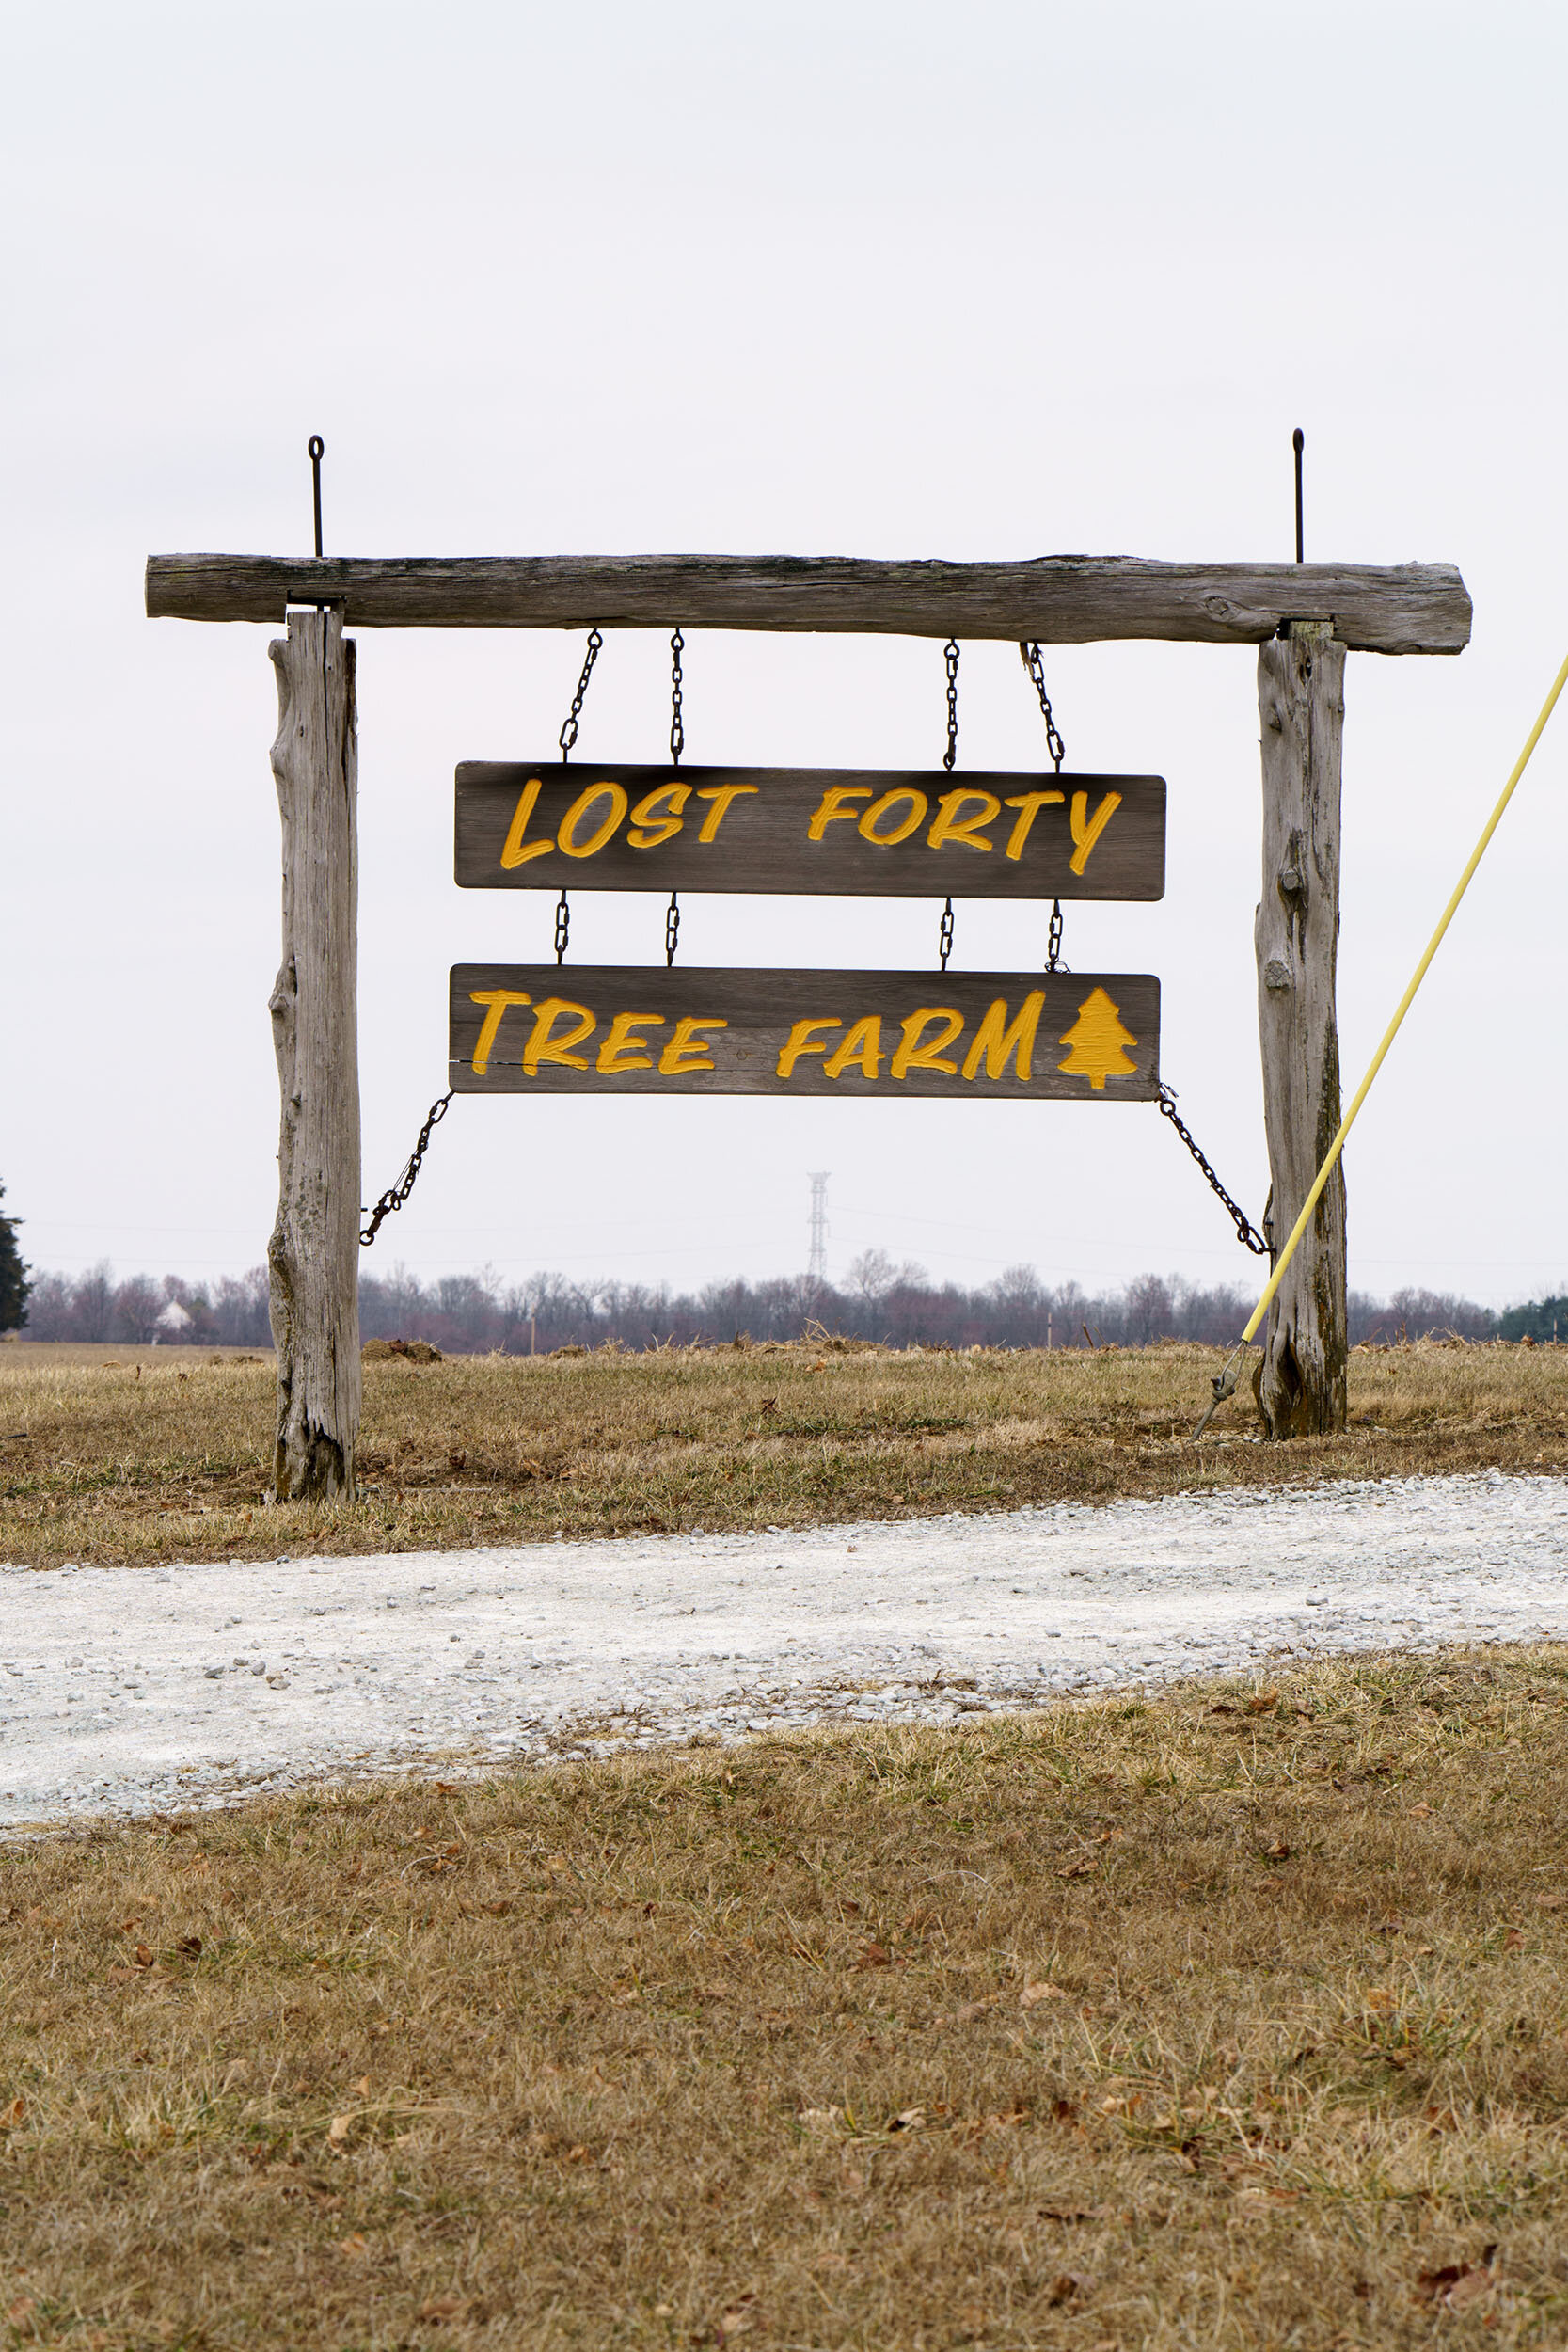  Since 2002, more than forty percent of Indiana’s Christmas tree farms have closed. The Lost Forty Tree Farm has been impacted by extreme weather and could only open one weekend the 2019 holiday season. 